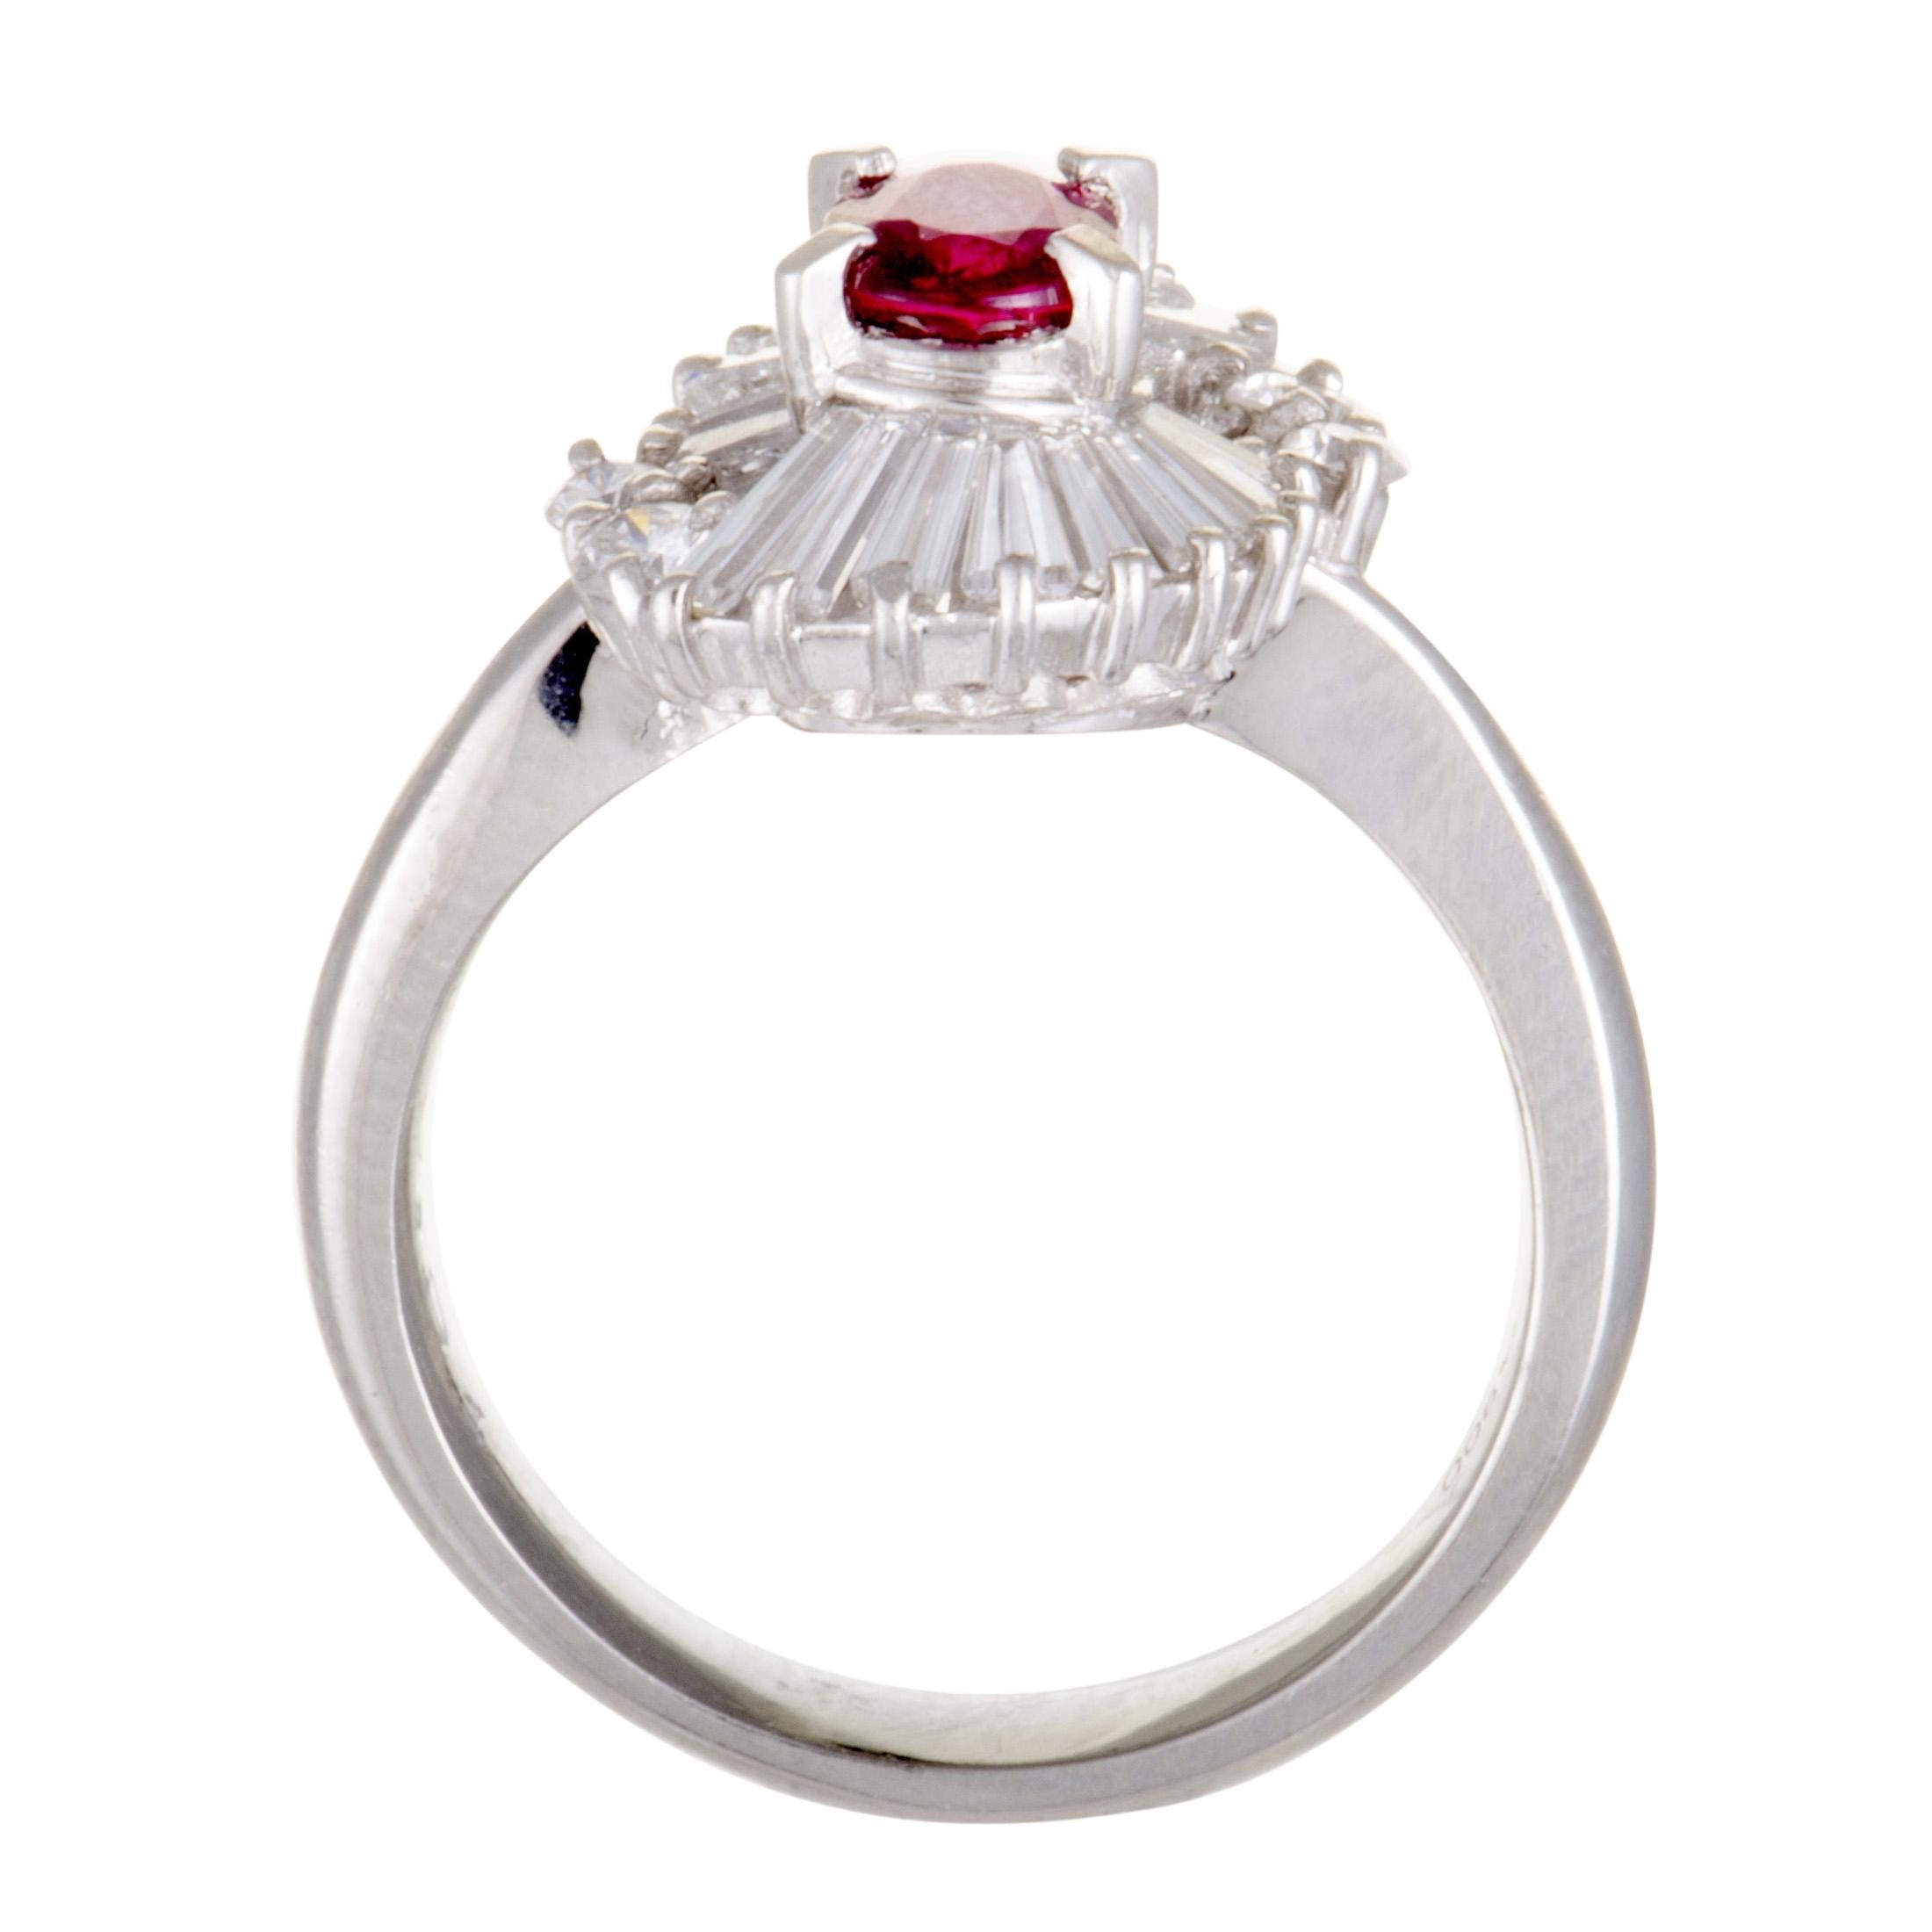 The diversely cut diamond stones that are expertly set against the elegant platinum create a splendid pedestal for the majestic ruby in this exquisite ring. The ruby weighs 0.62 carats and the diamonds amount to 0.91 carats.
Ring Top Dimensions: